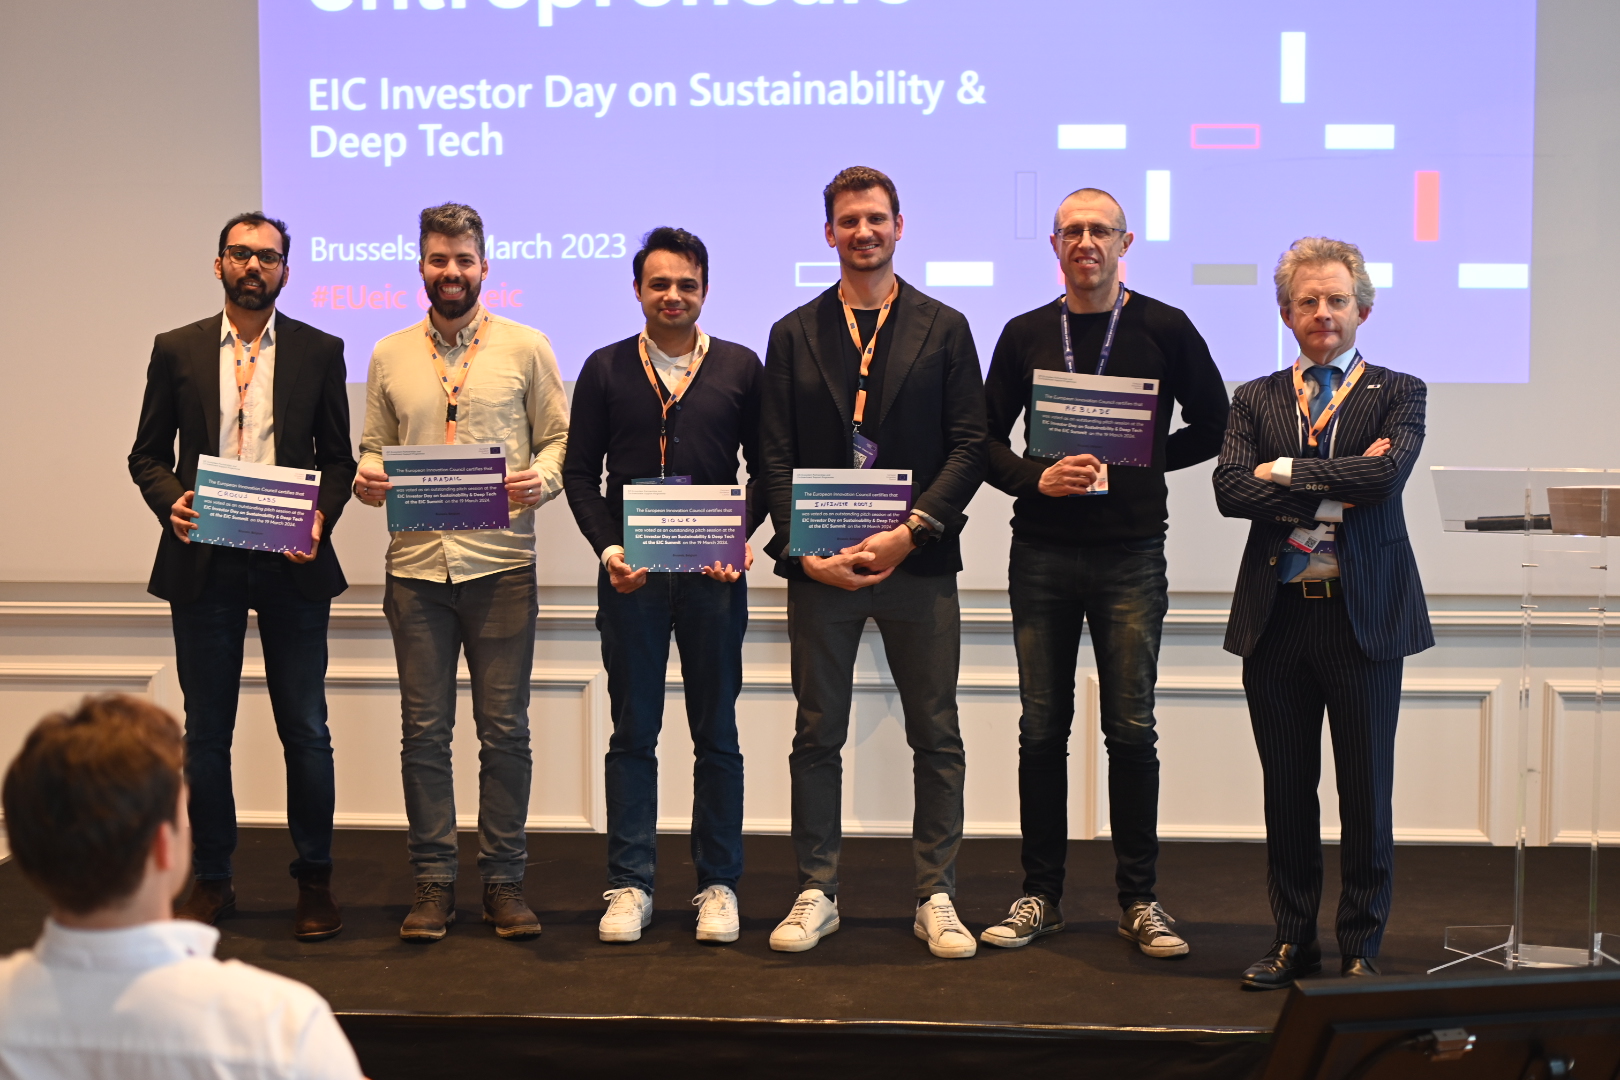 Winners of the pitching sessions pose with Head of the EIC board at the event